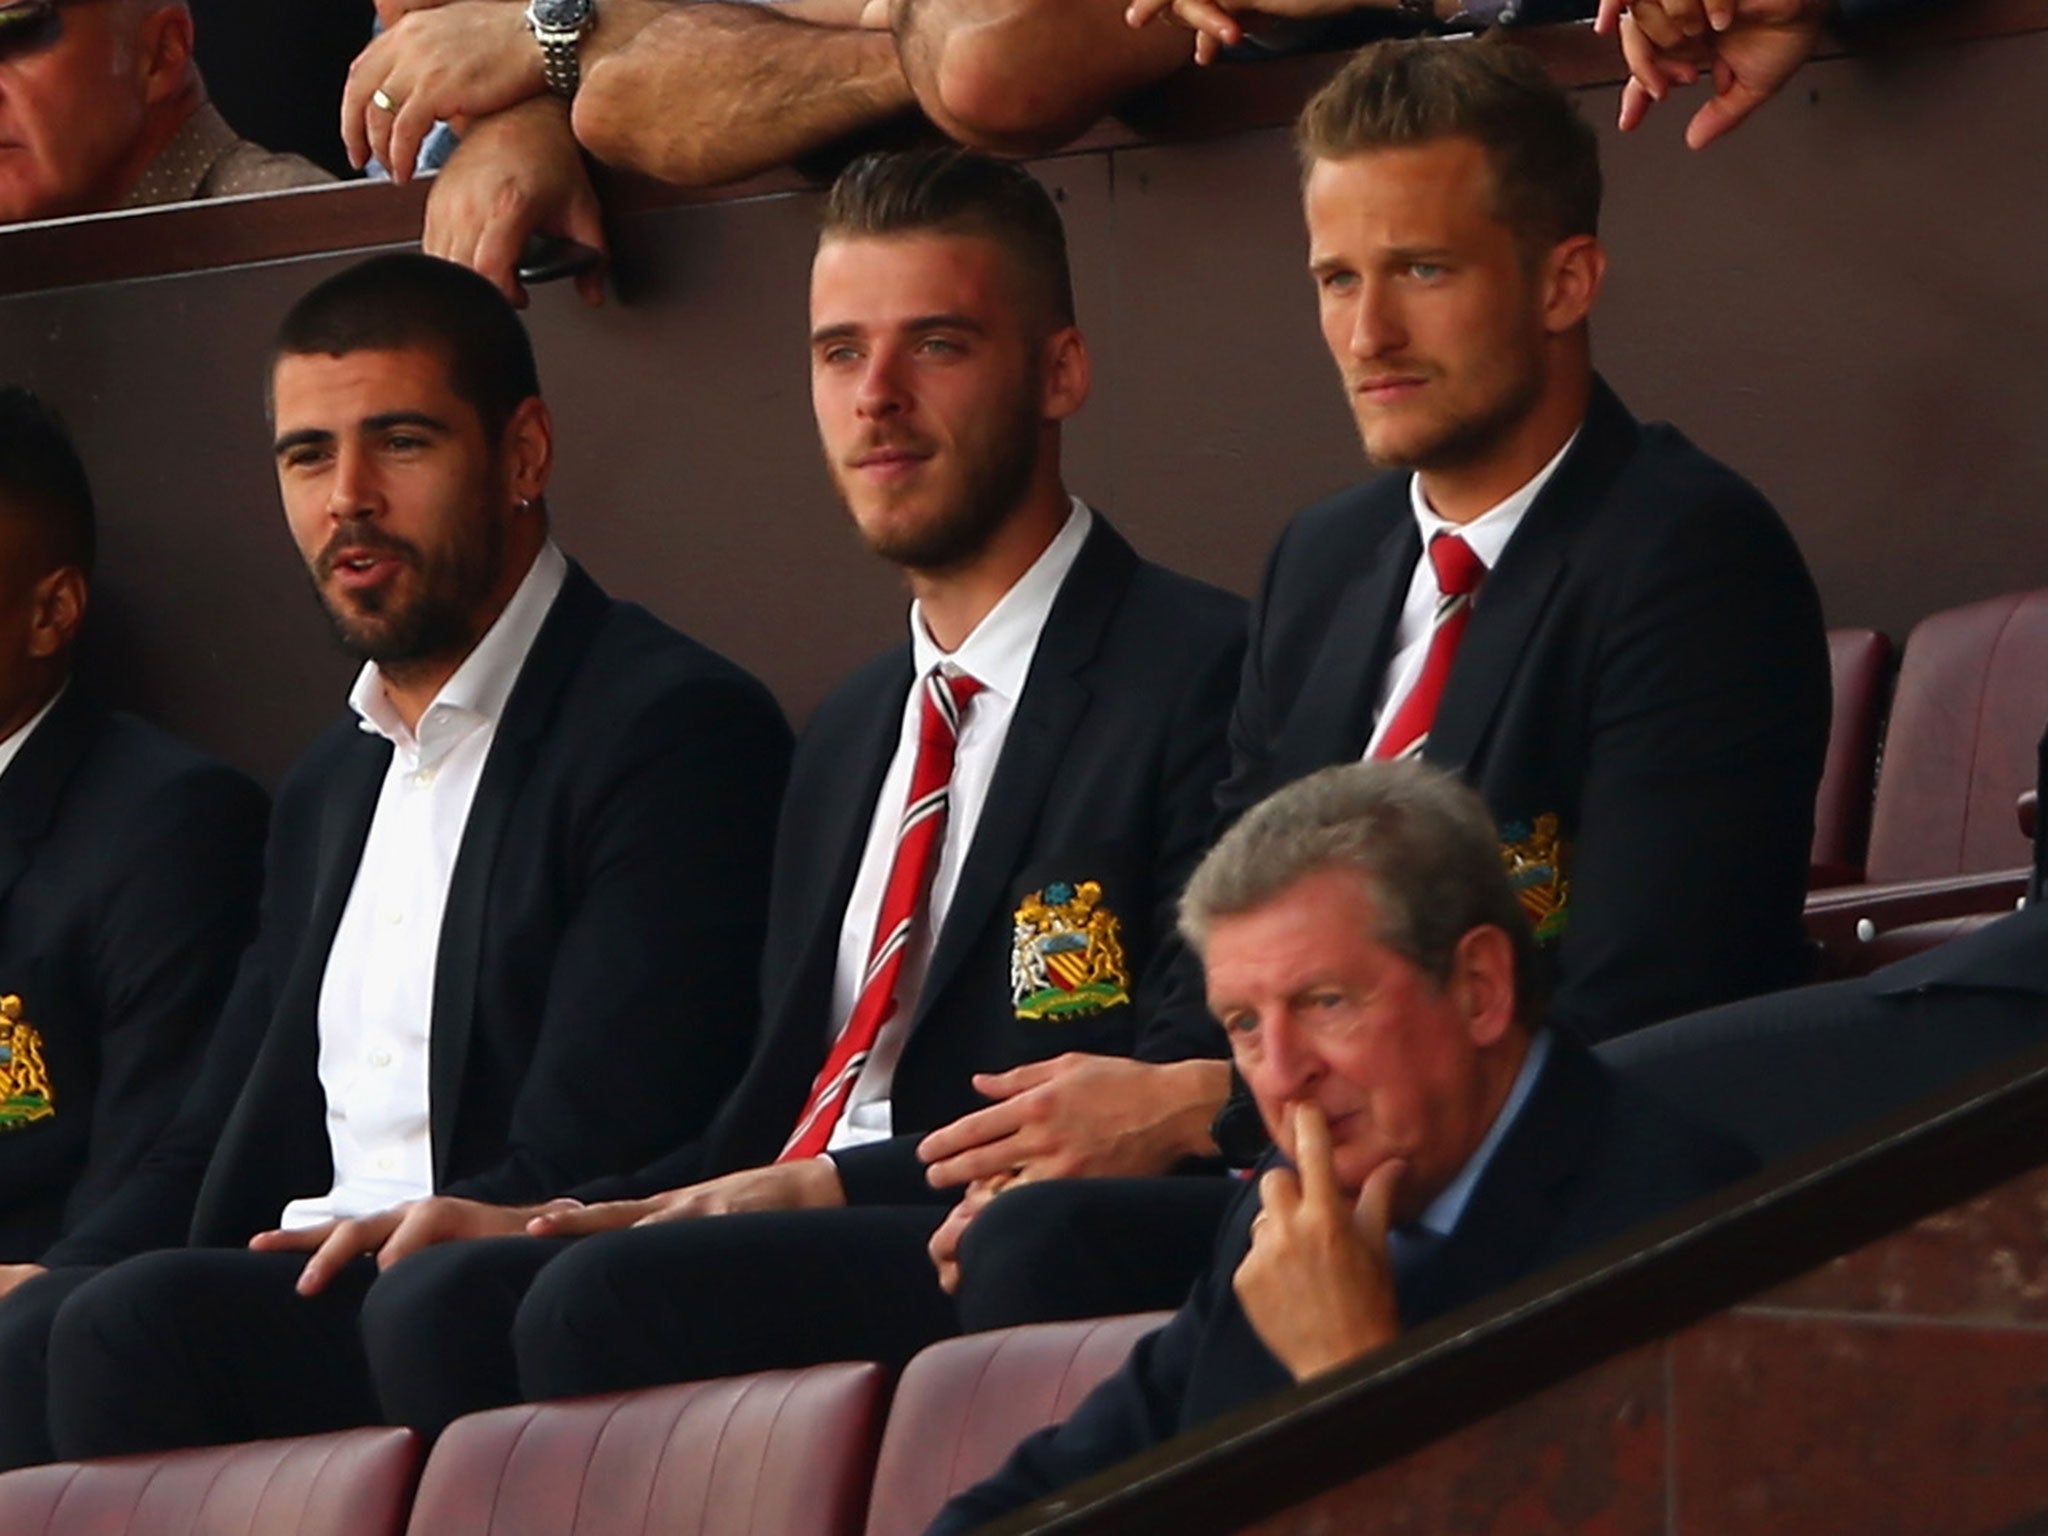 David De Gea, Victor Valdes (centre) and Anders Lindegaard watch Manchester United from the stands